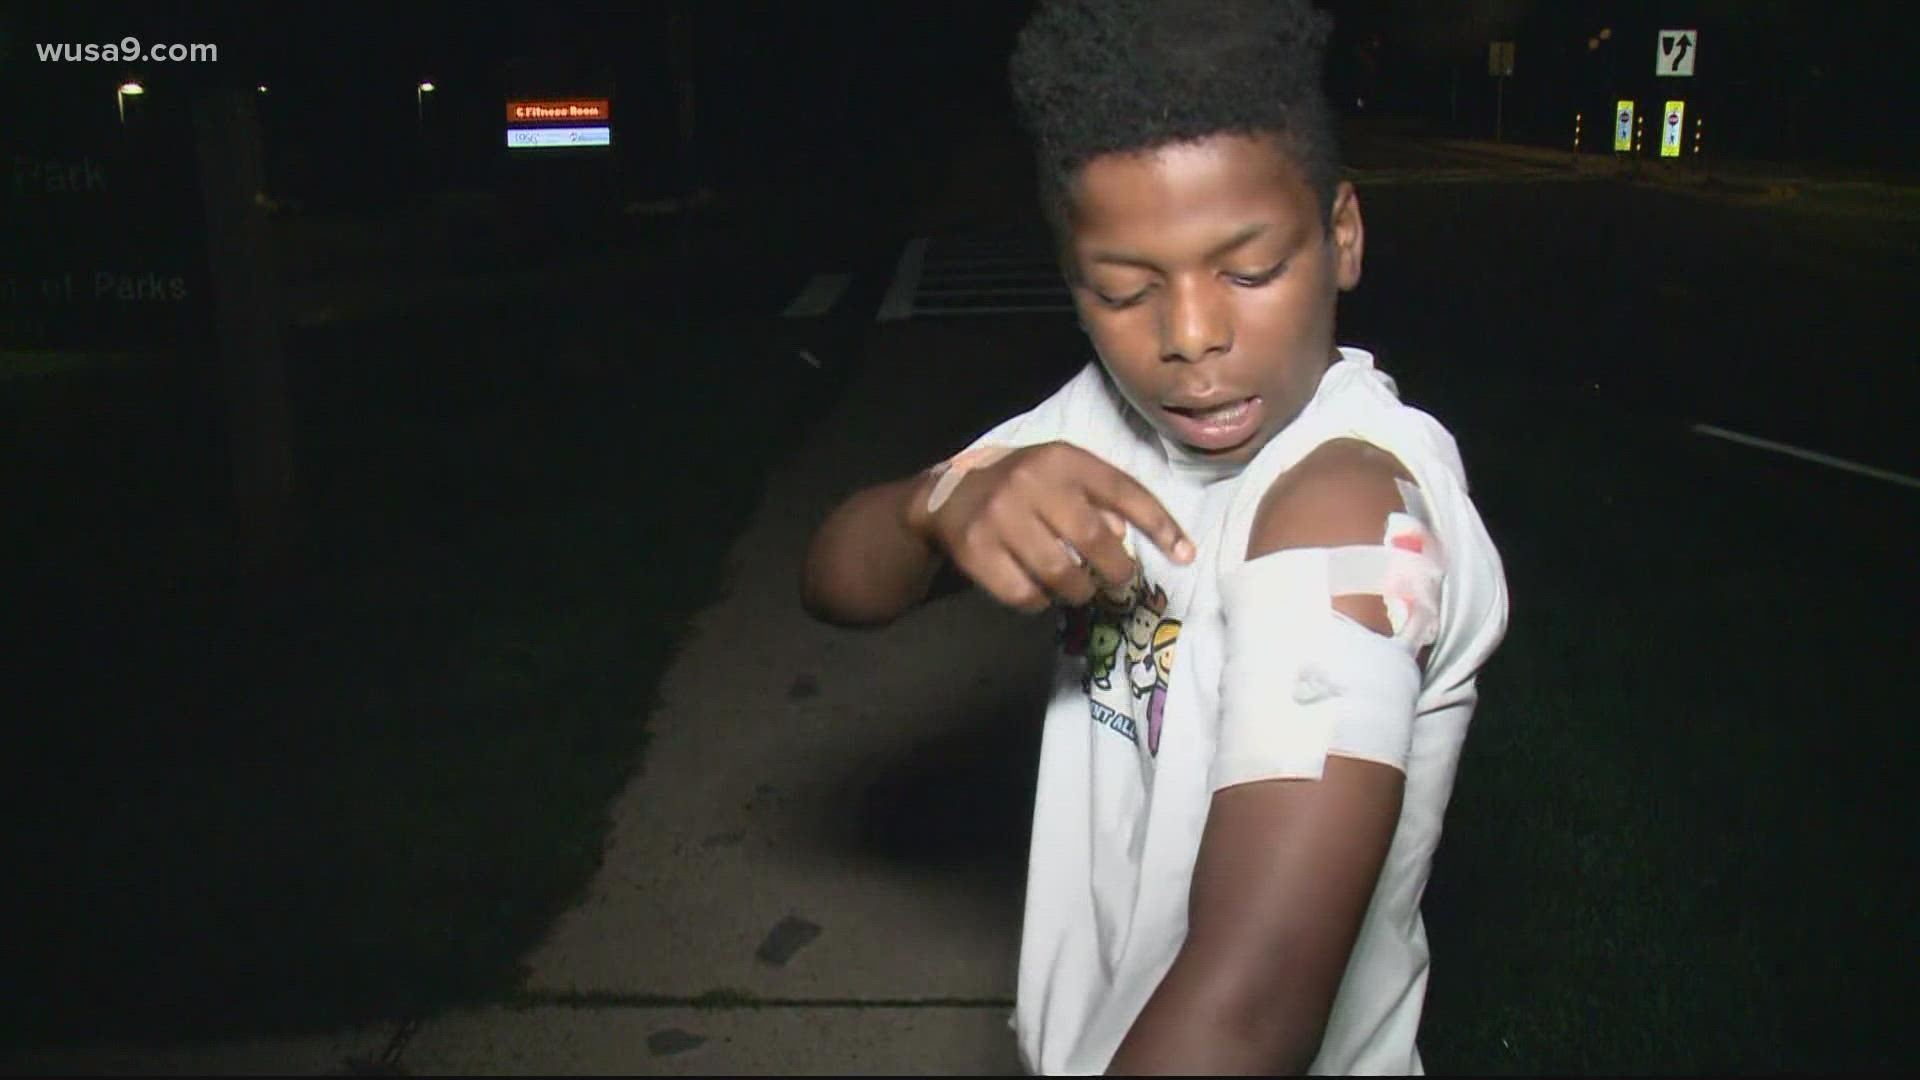 Police tell us they found the 14-year-old suspect a short time after last night's shooting and subsequently charged him as an adult.